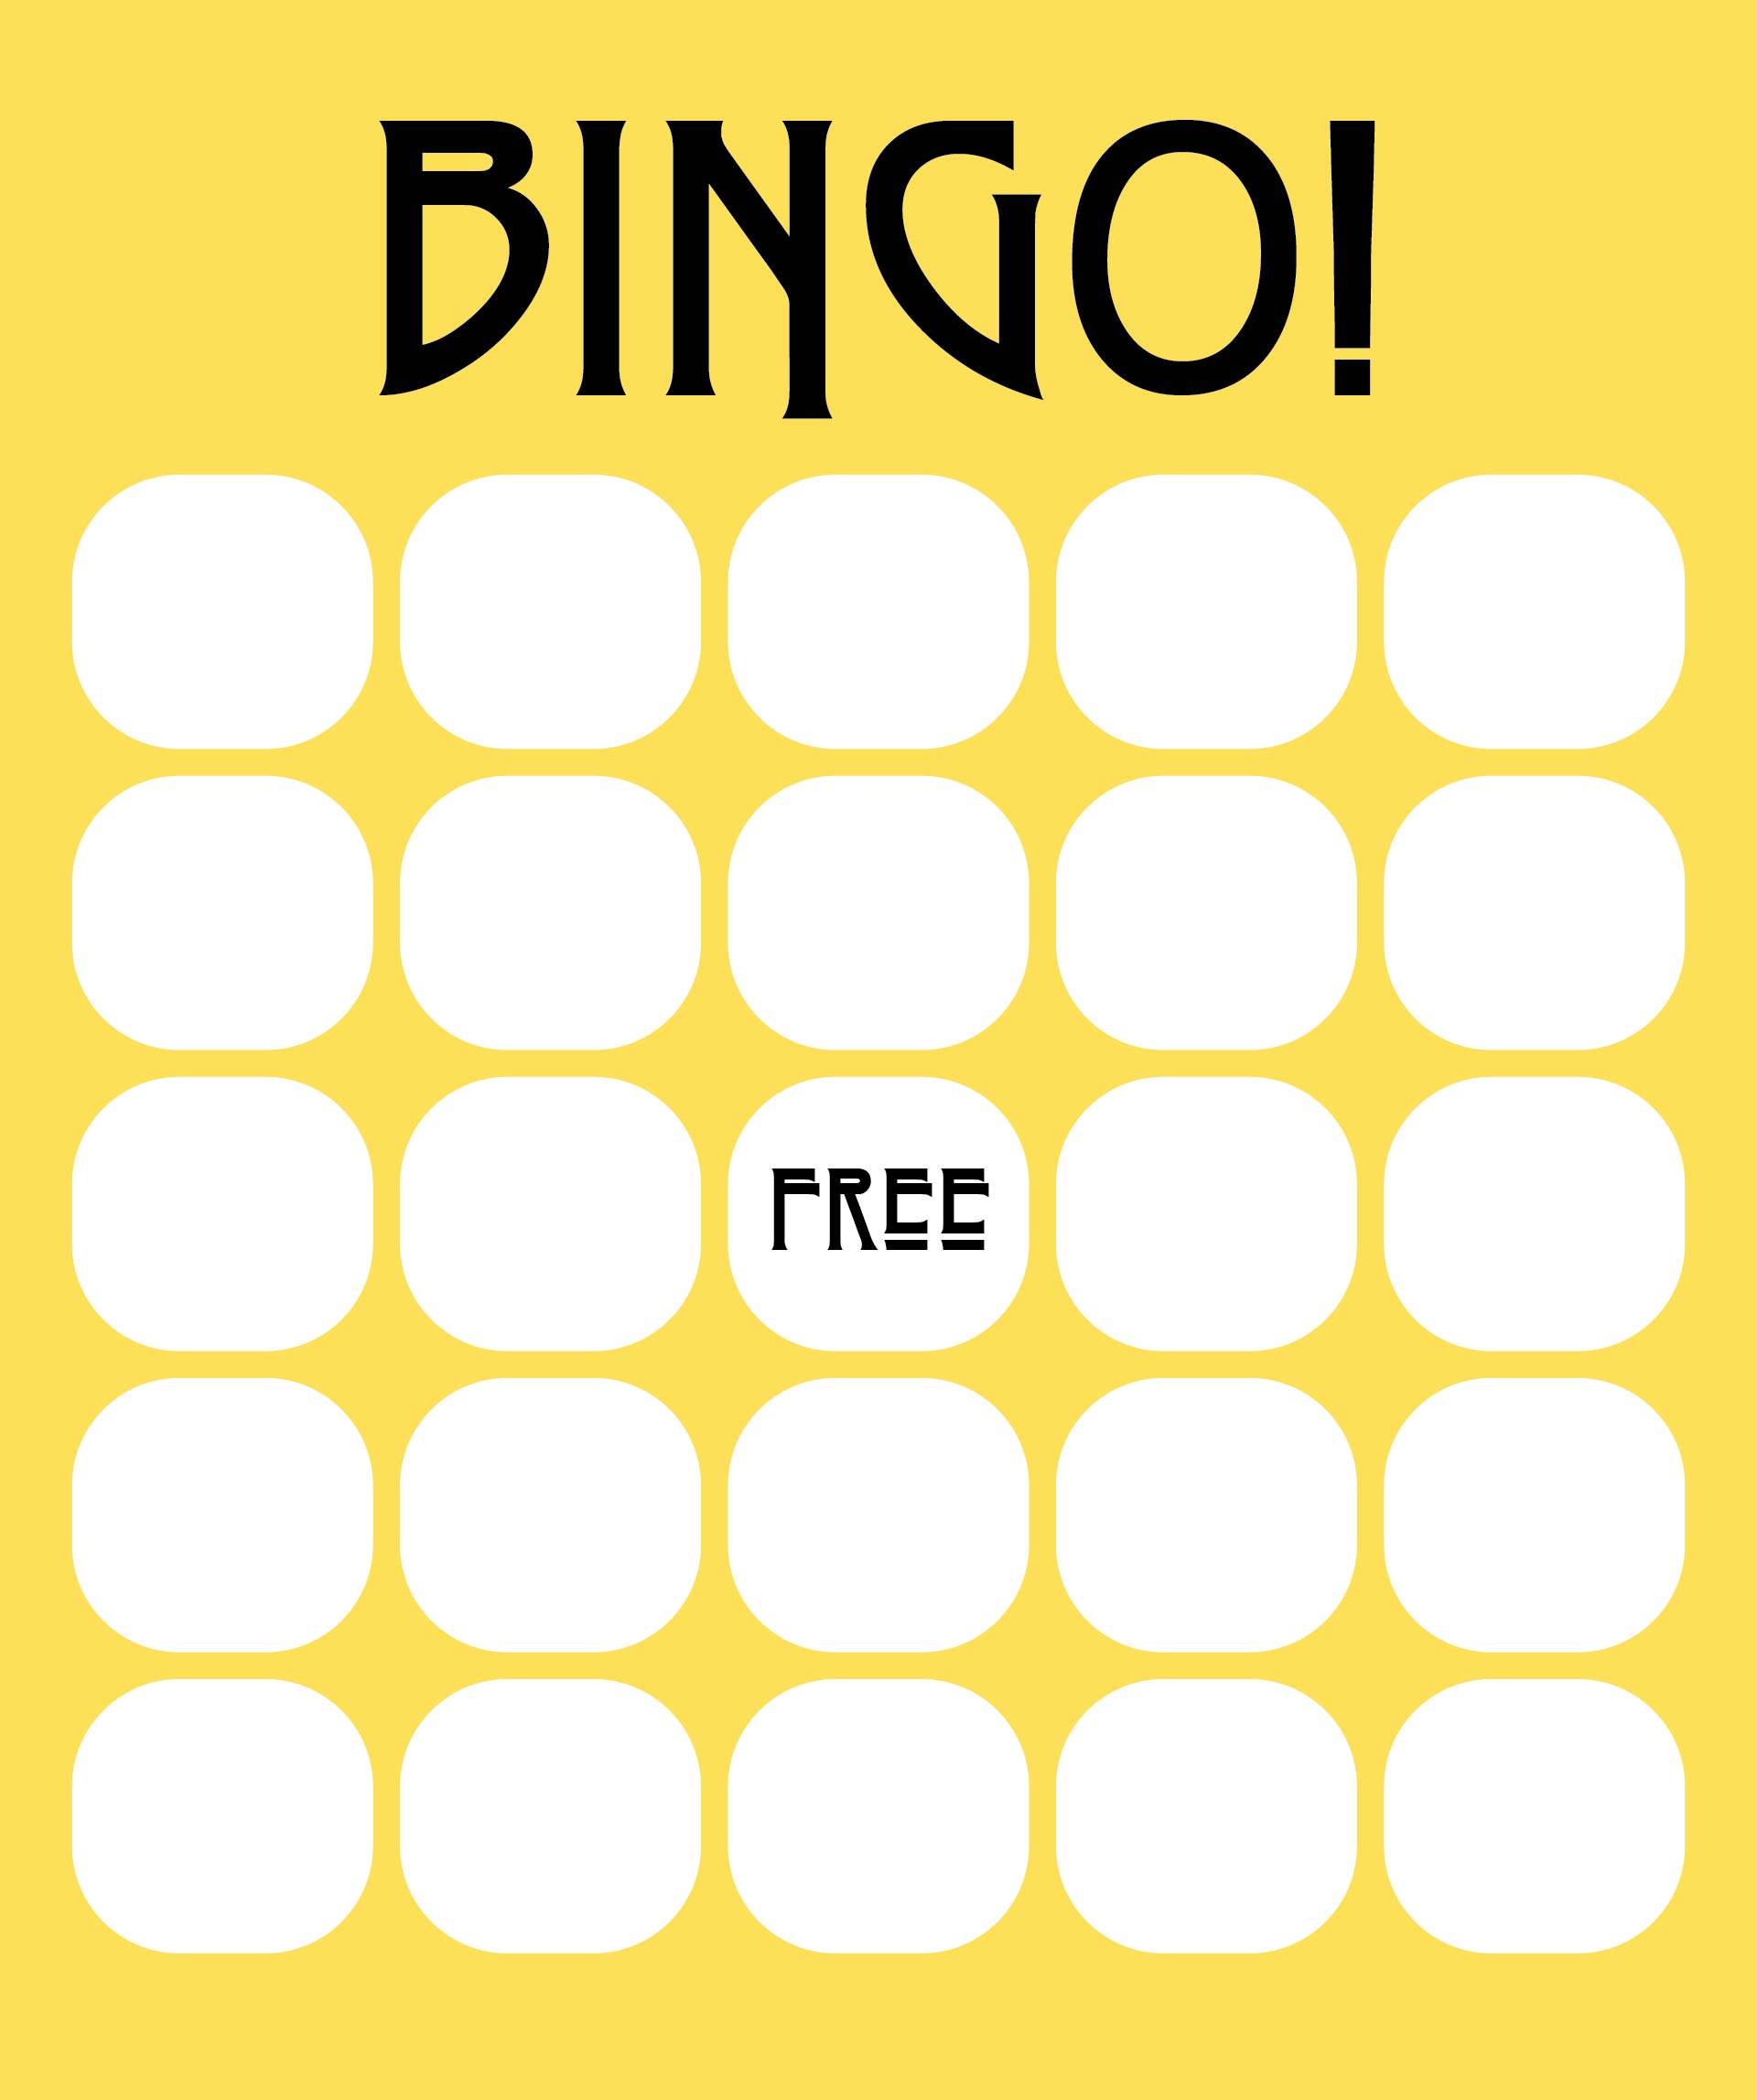 blank-bingo-card-template-microsoft-word-awesome-free-template-for